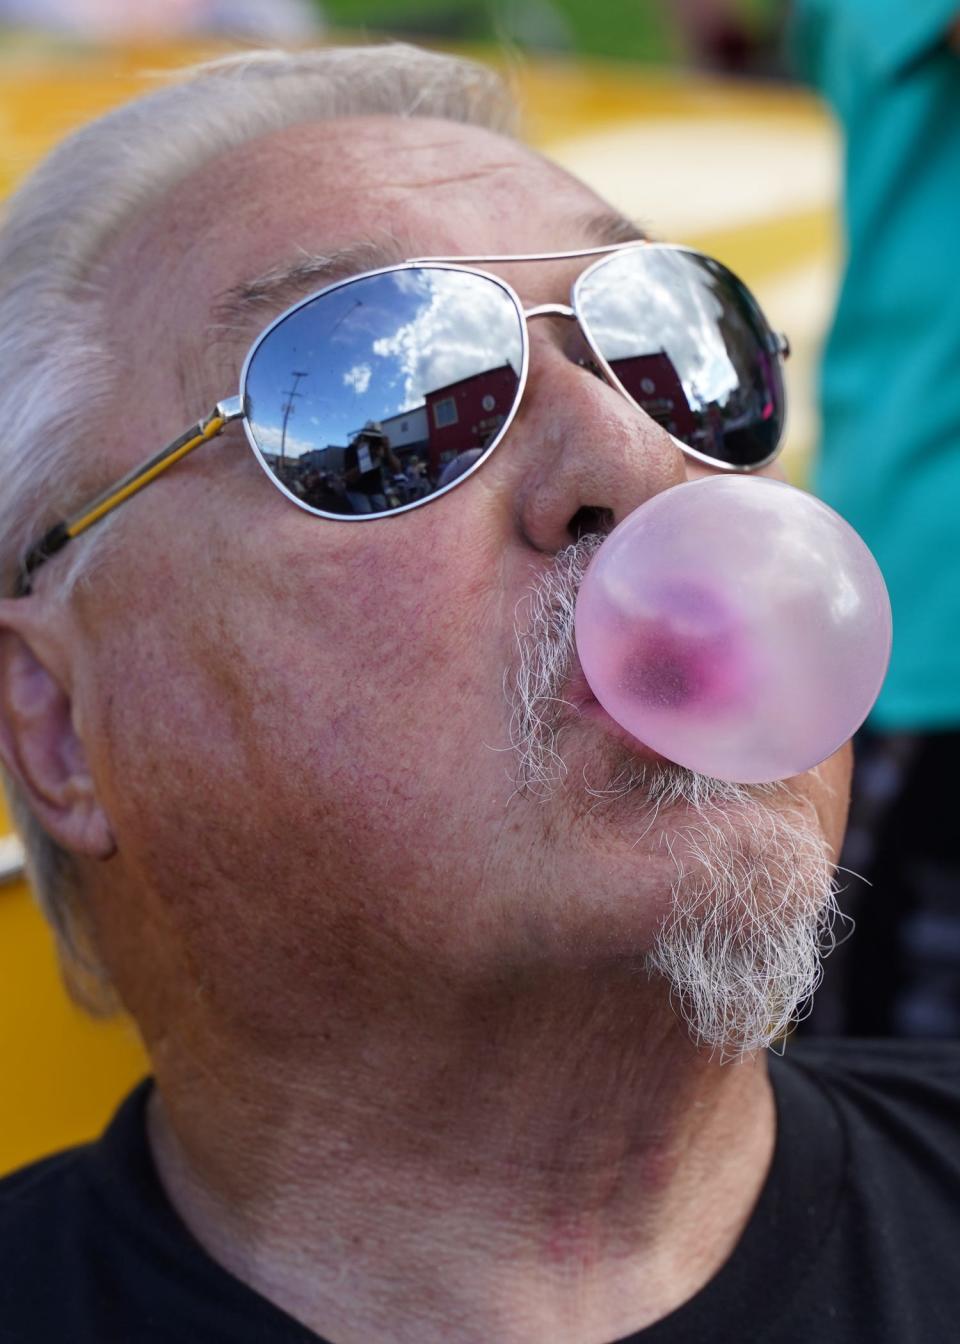 Ron Wilson of Adrian blows a bubblegum bubble Tuesday, Aug. 9, 2022, in downtown Adrian during the 20th anniversary celebration at Nova's Soda Pop Candy Shop, 105 E. Church St. The theme of the anniversary event was 1950s-60s and also featured a hula hoop contest.